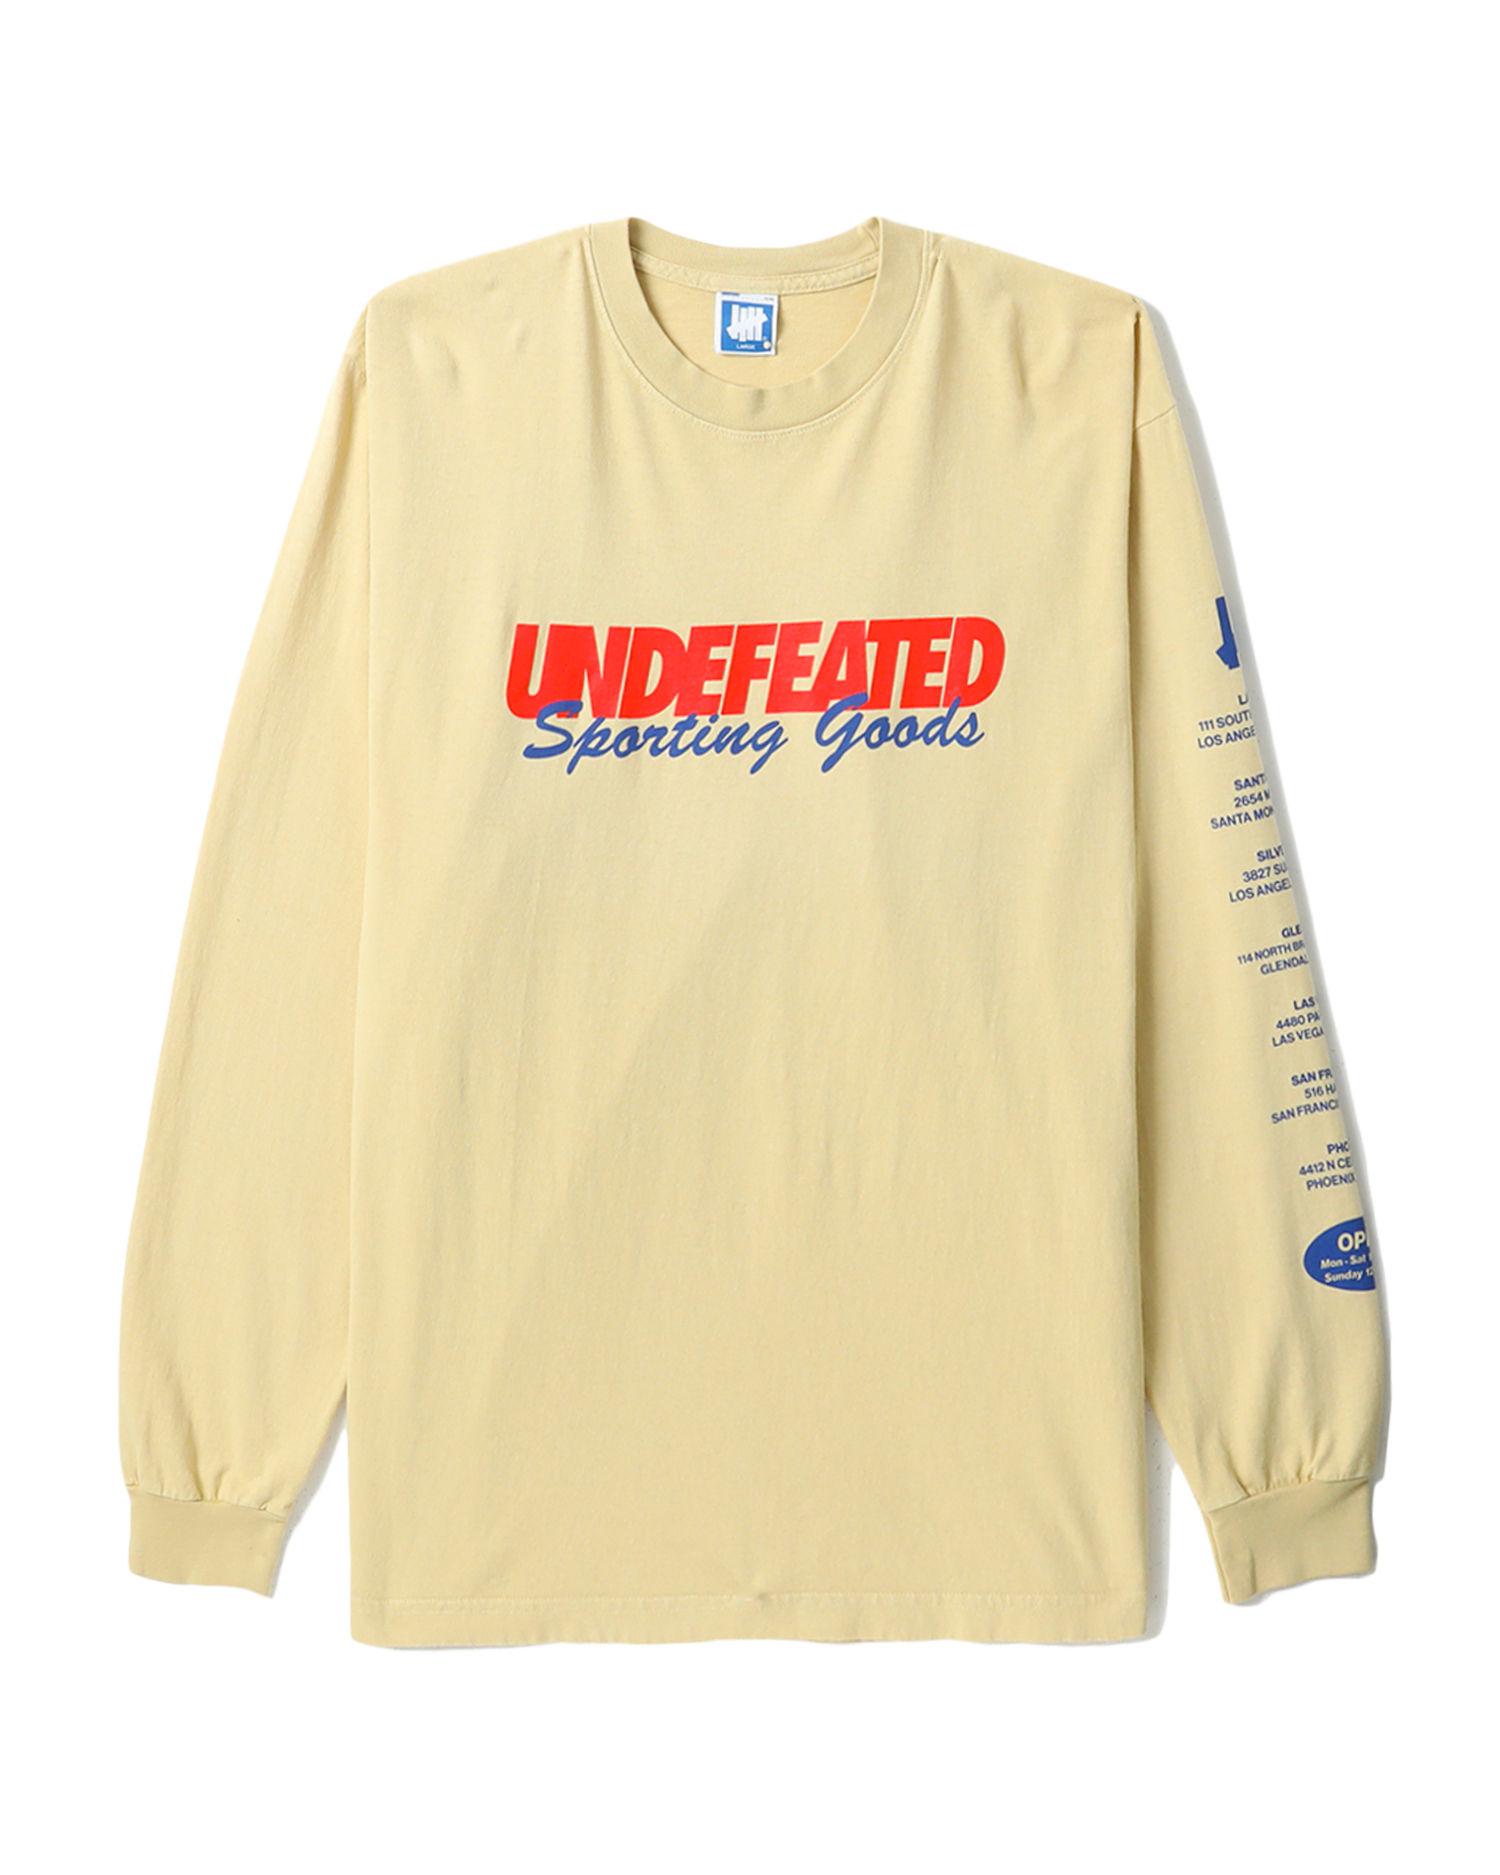 Sporting goods L/S tee